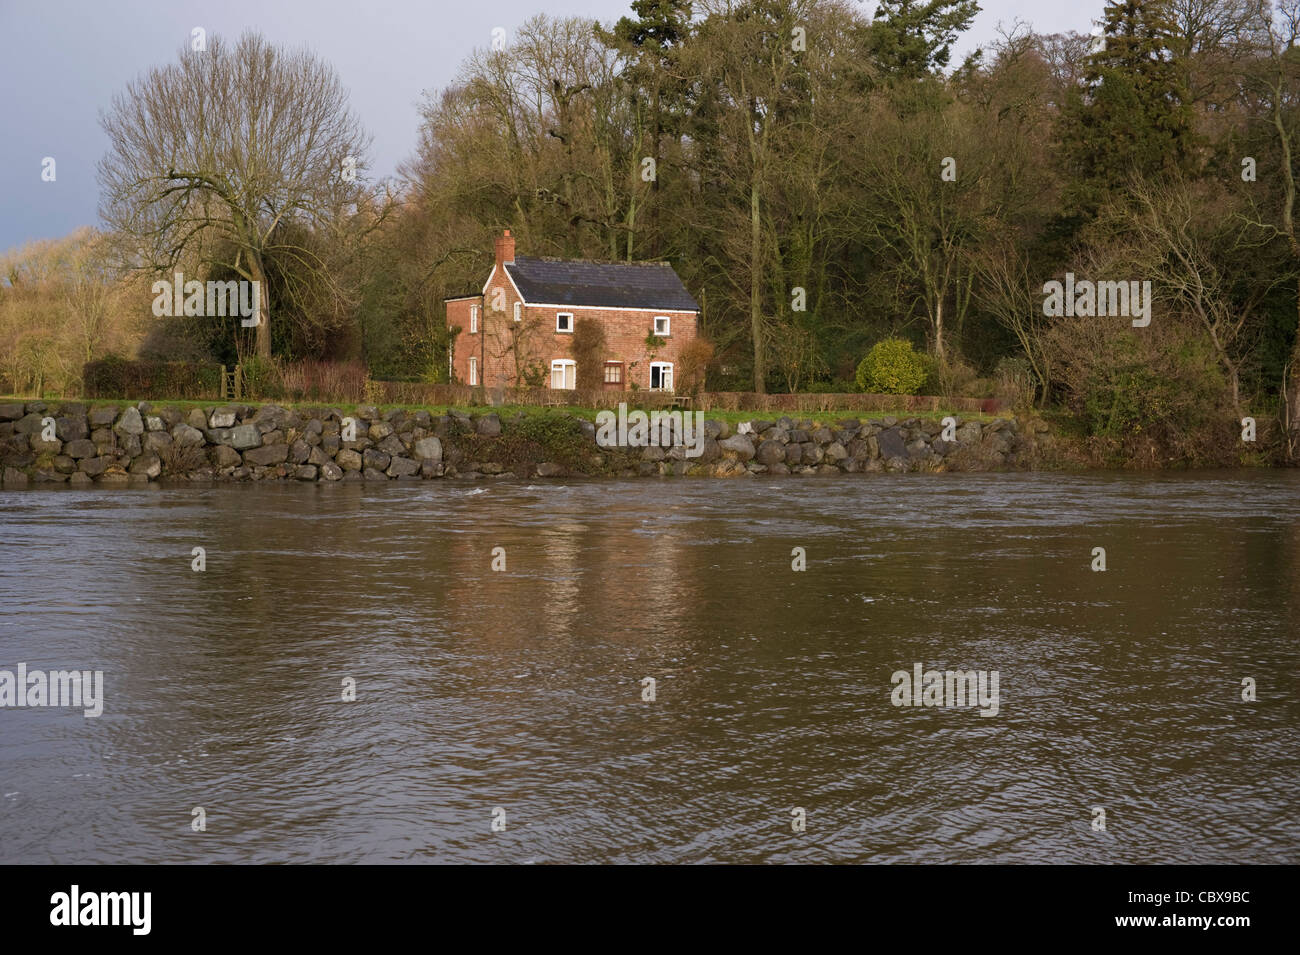 Idyllic Nethouse Cottage On The Banks Of The River Wye In Flood